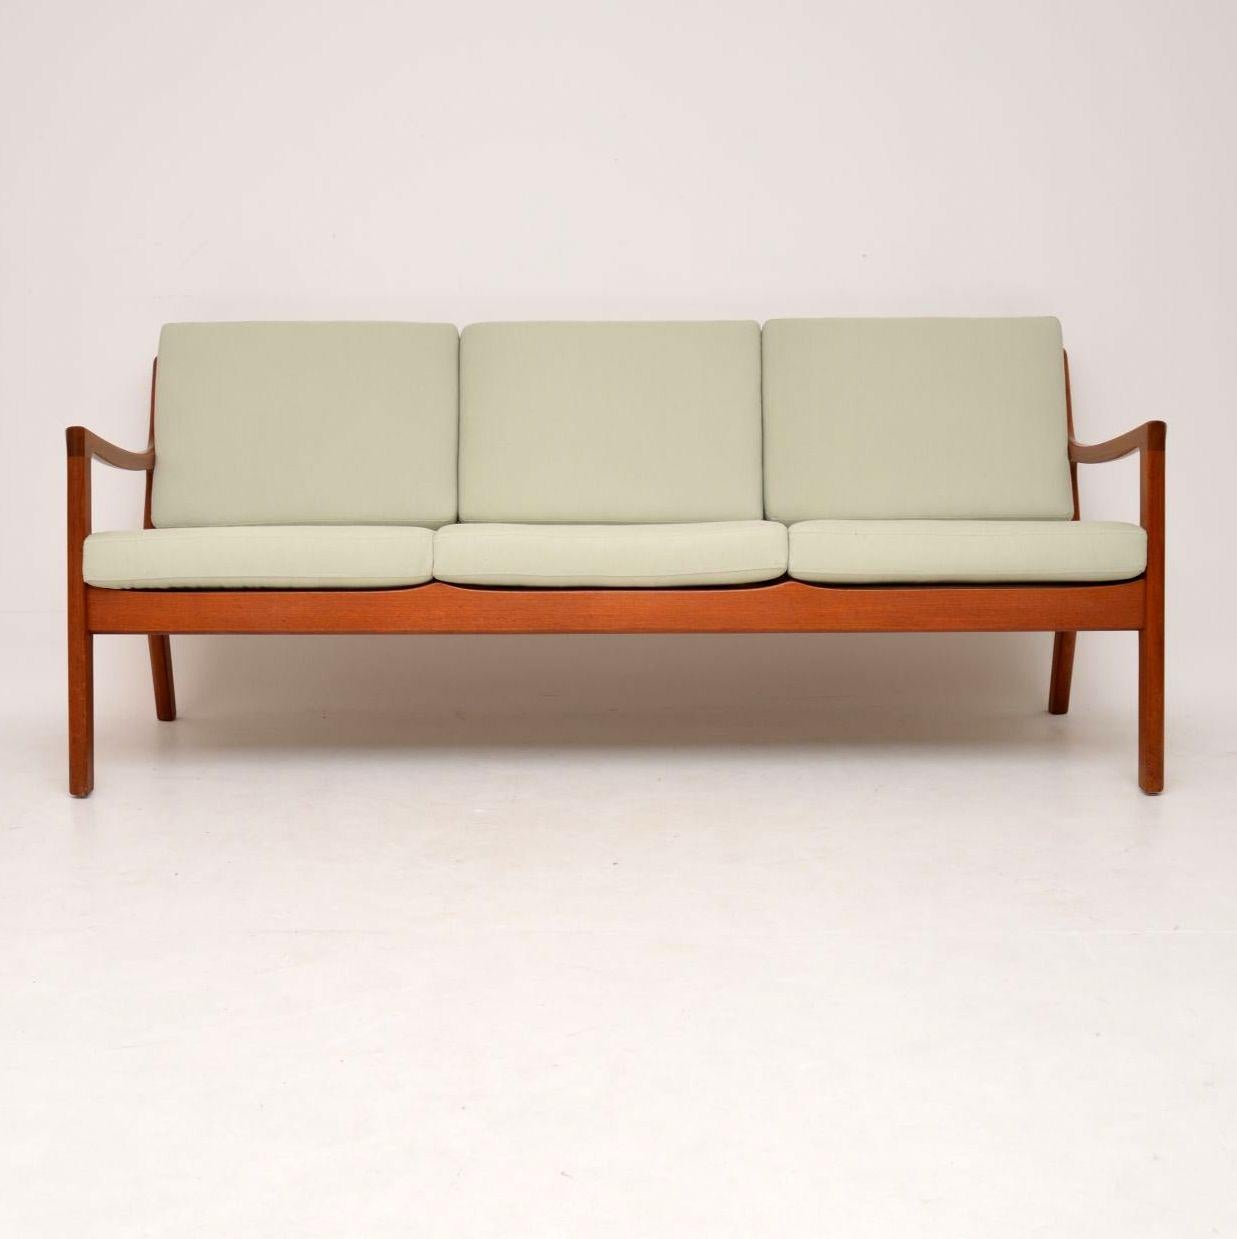 A stunning Danish sofa in solid teak, this model is called the ‘Senator’, it was designed by Ole Wanscher and was made by France & Son in the 1960s. It’s in excellent condition for it’s age, the teak frame is clean, sturdy and sound, with only some